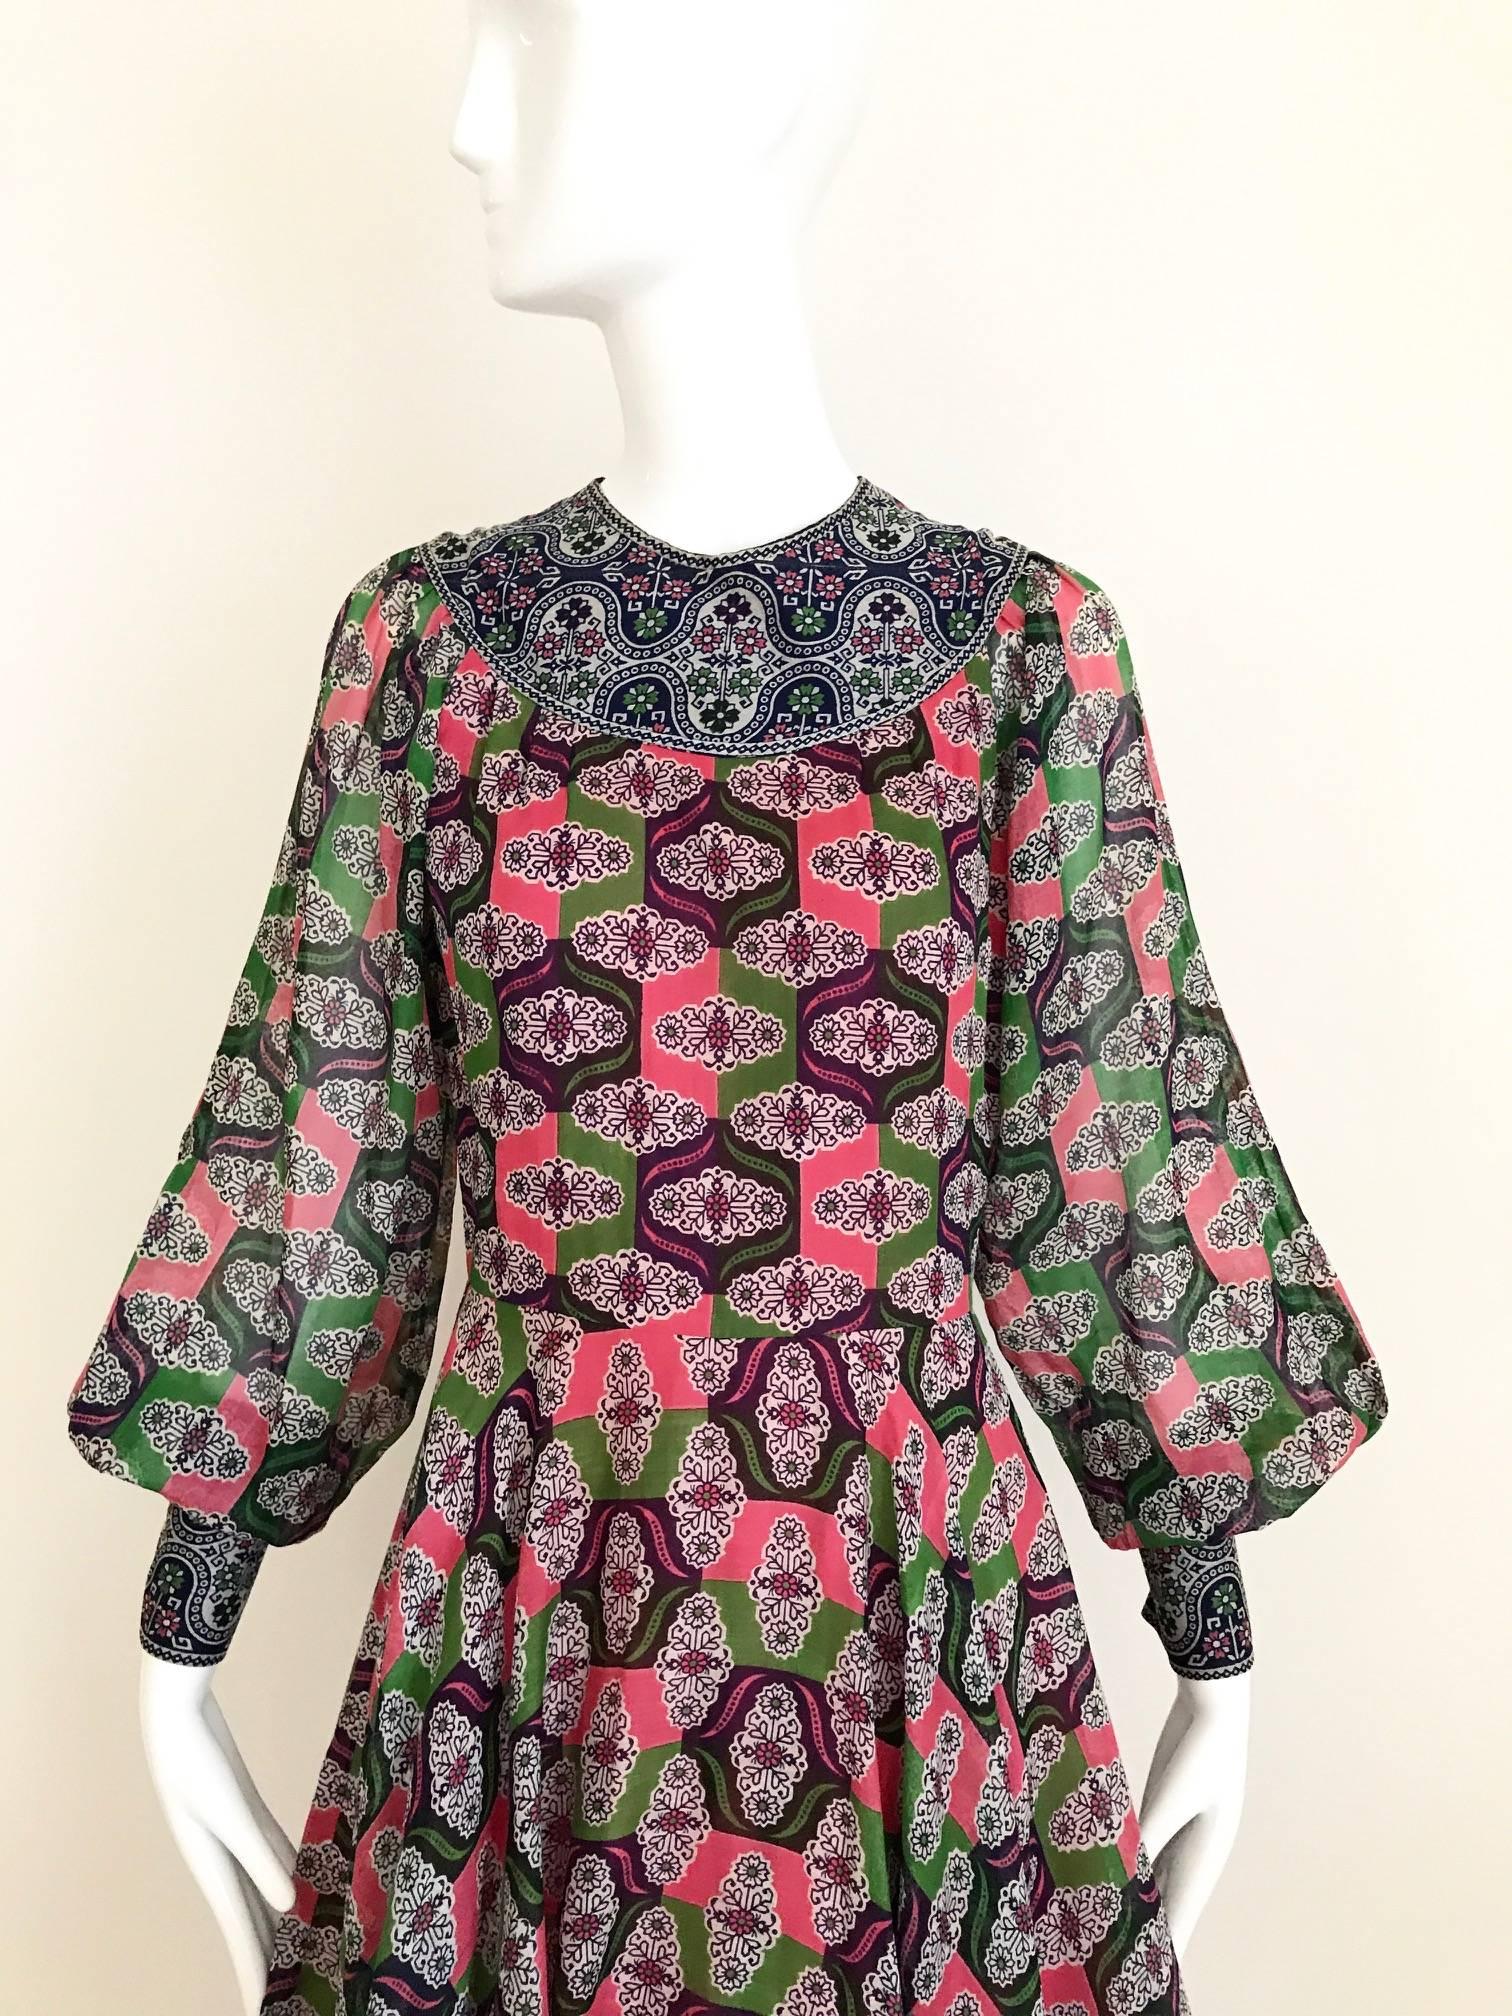 Beautiful 70s vintage ethnic Indian geometric print, purple, pink, green and blue cotton print dress has billowy sleeves with long snap button cuffs with flair skirt. Dress is lined in cotton.
 Measurement:
Sleeve length: 27 inches / Bust : 34 inch